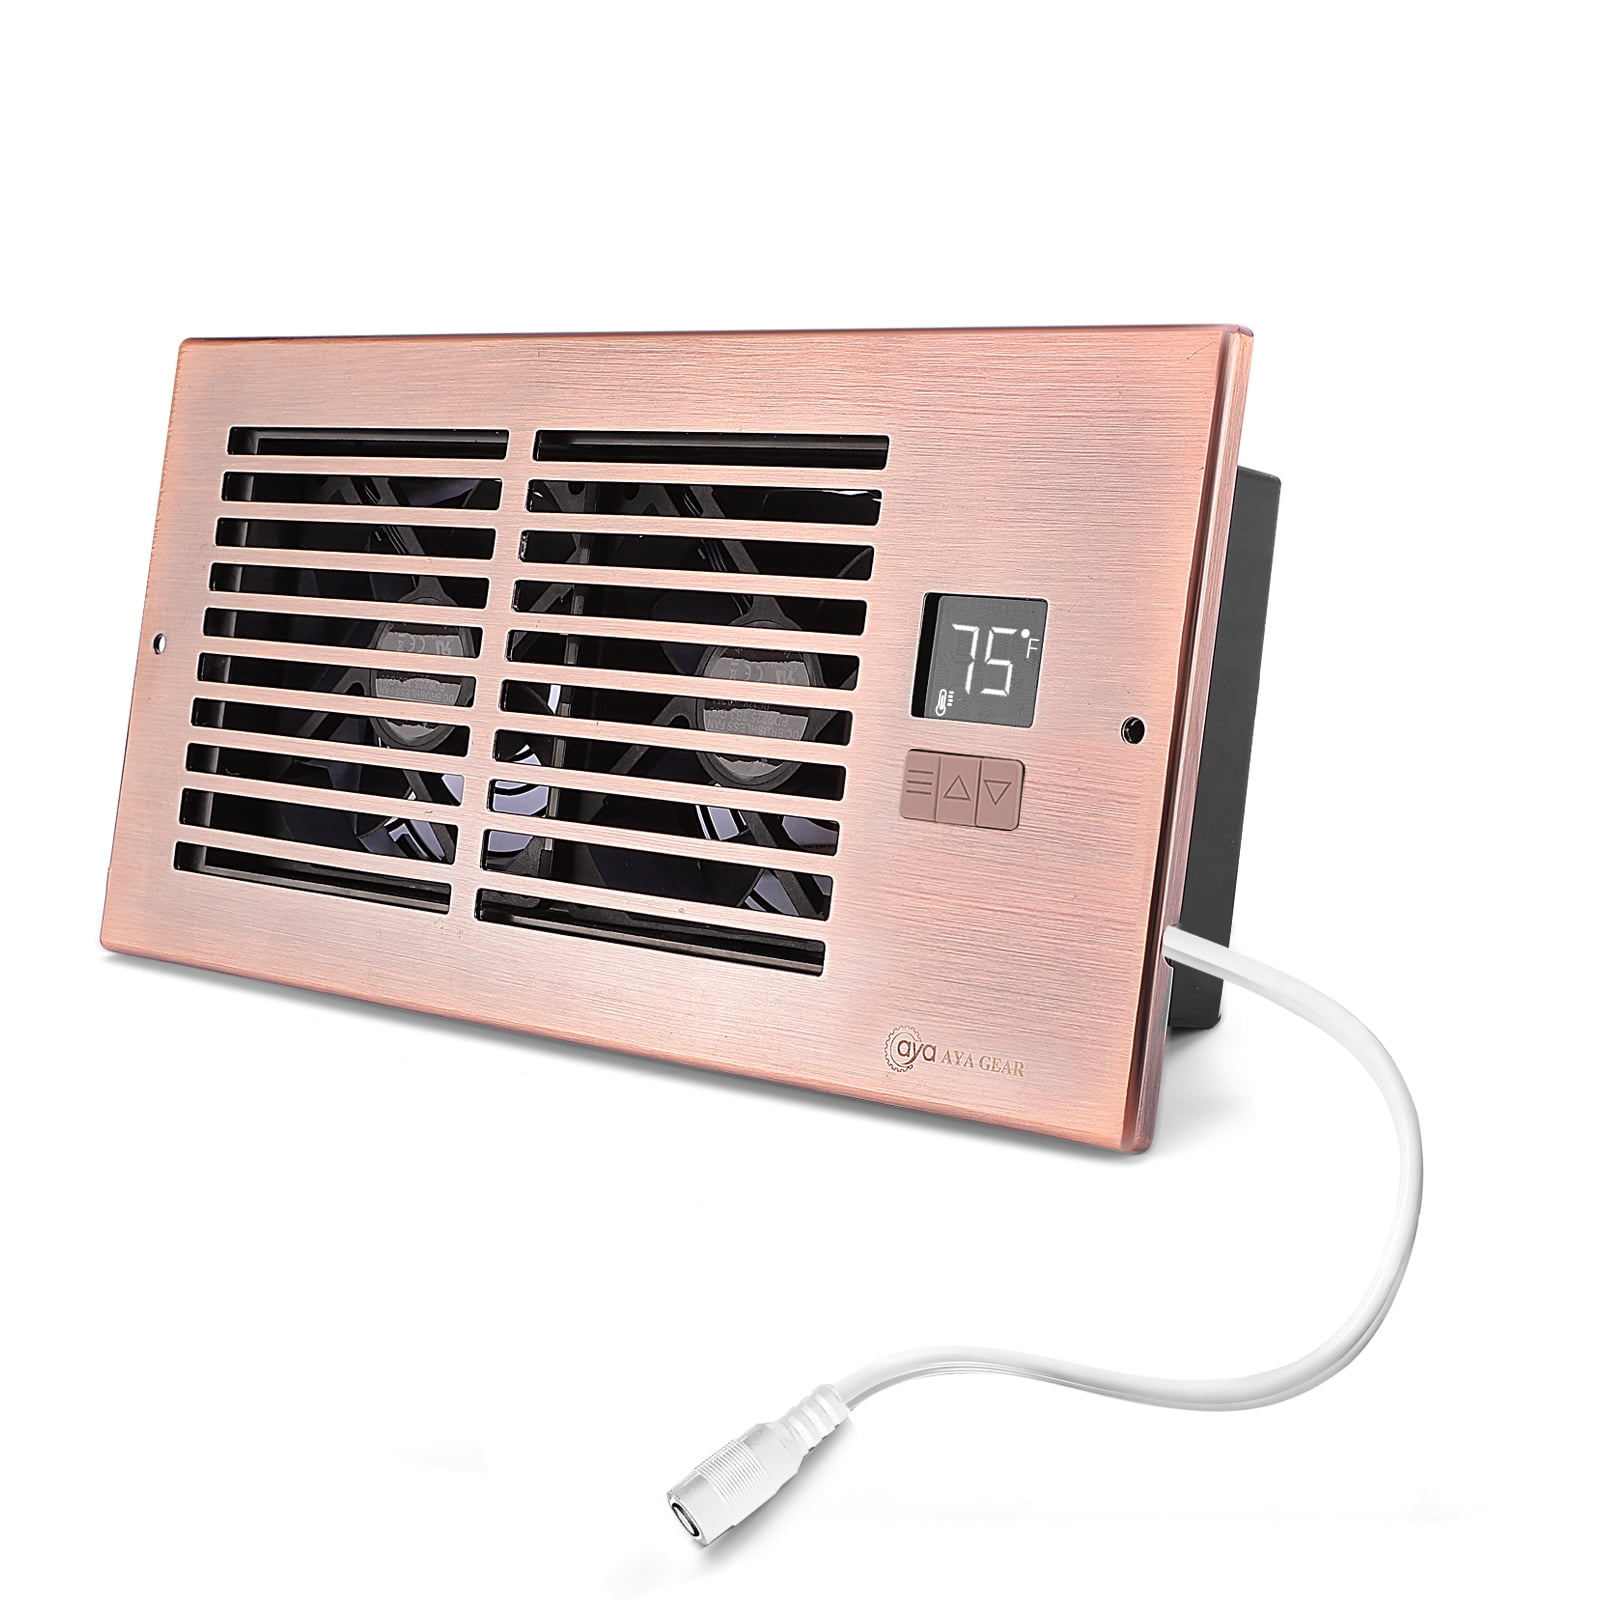 AC Infinity AIRTAP T6, Quiet Register Booster Fan with Thermostat 10-Speed  Control, Heating Cooling AC Vent, Fits 6” x 12” Register Holes